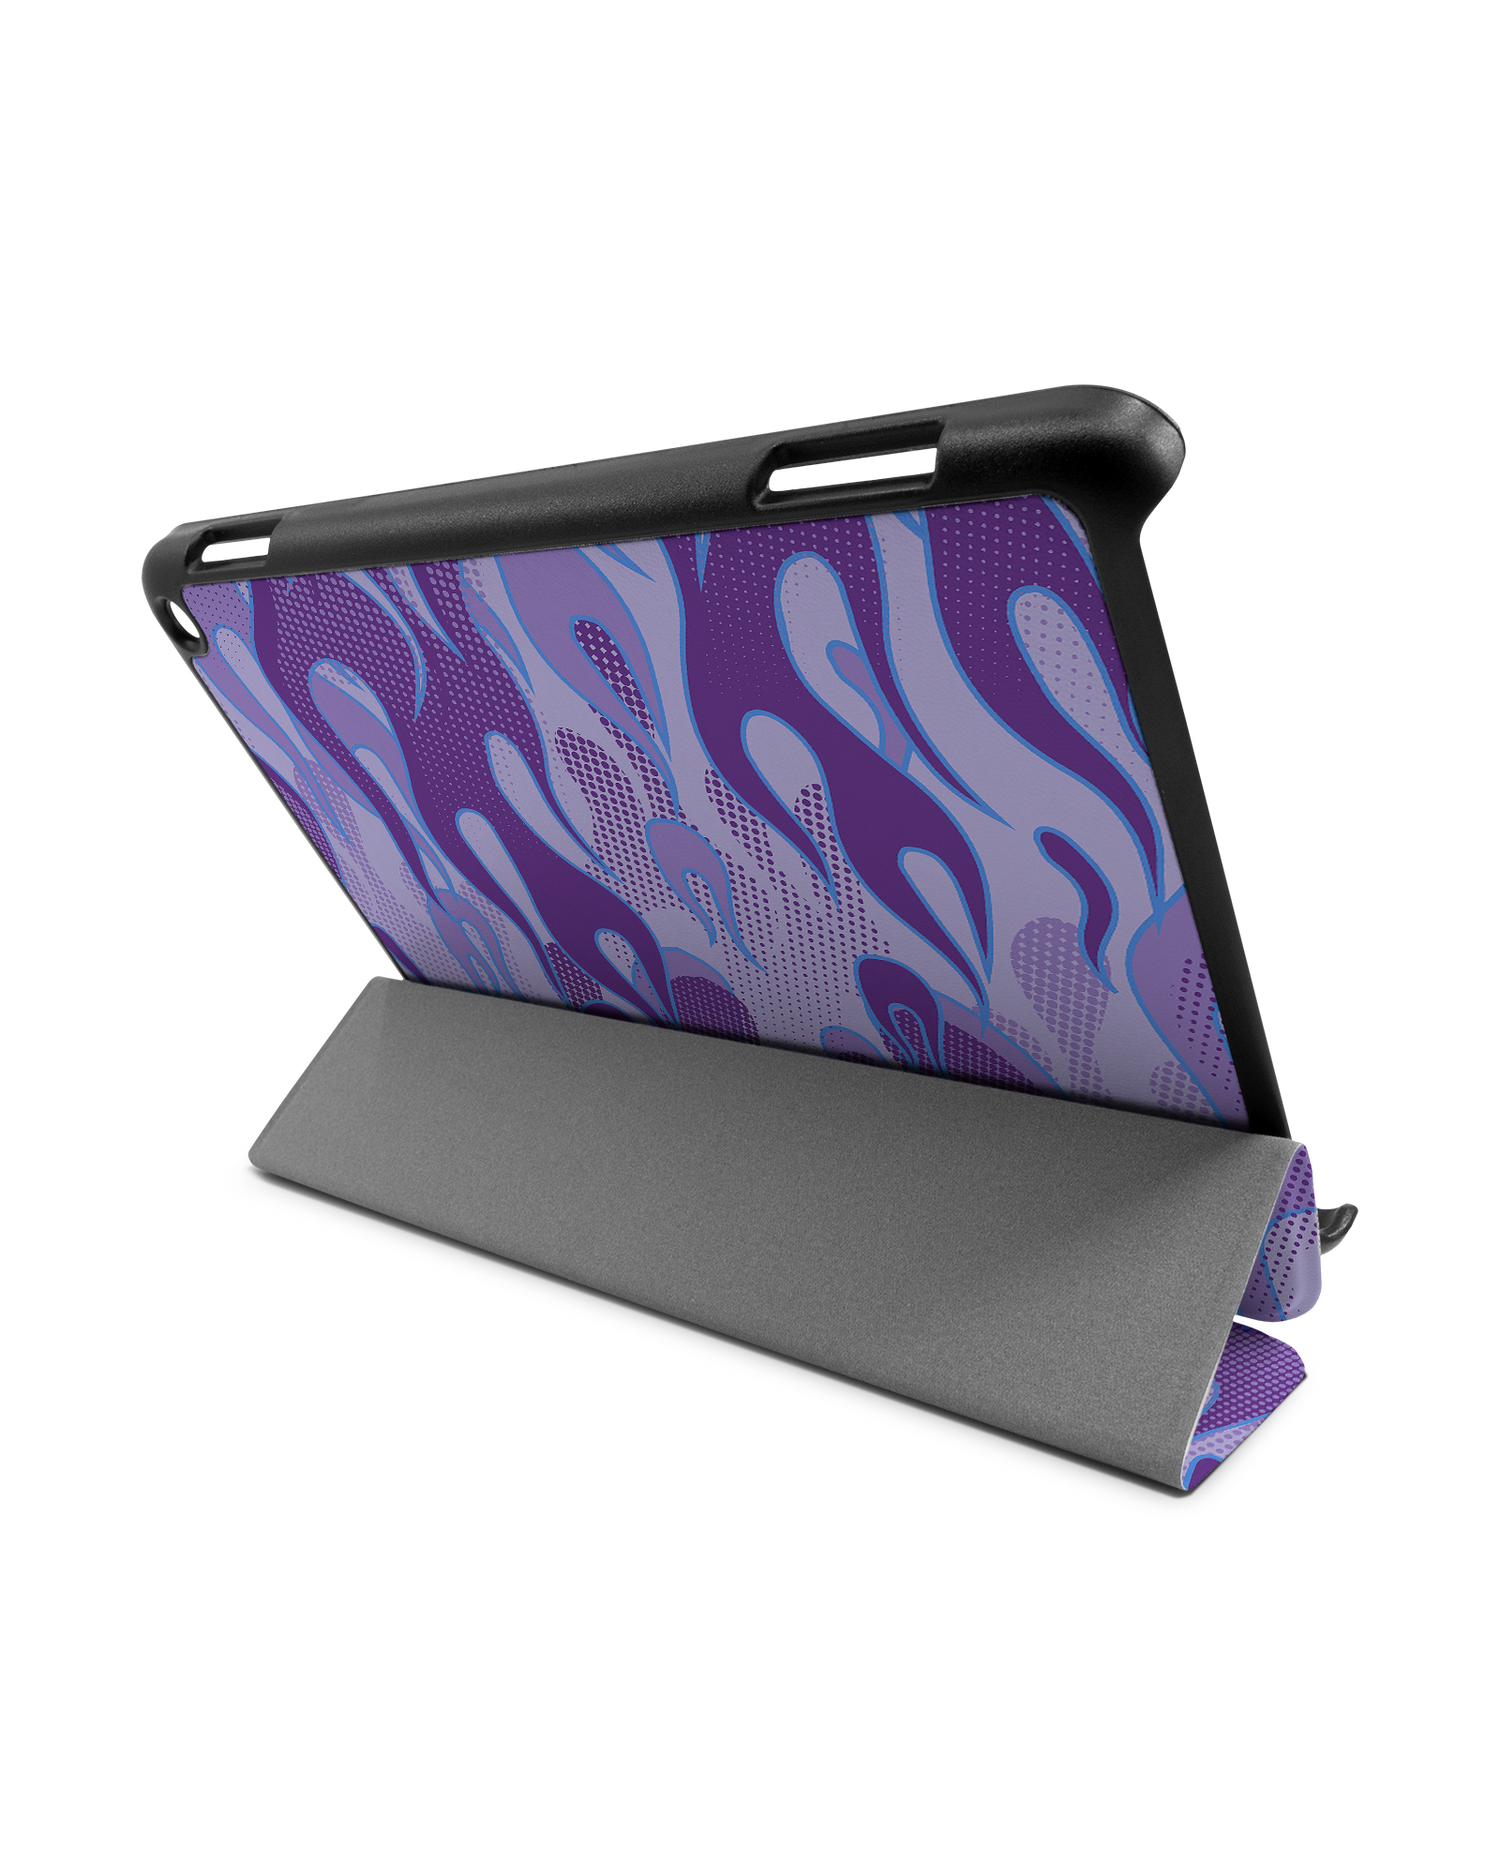 Purple Flames Tablet Smart Case for Amazon Fire HD 8 (2022), Amazon Fire HD 8 Plus (2022), Amazon Fire HD 8 (2020), Amazon Fire HD 8 Plus (2020): Used as Stand